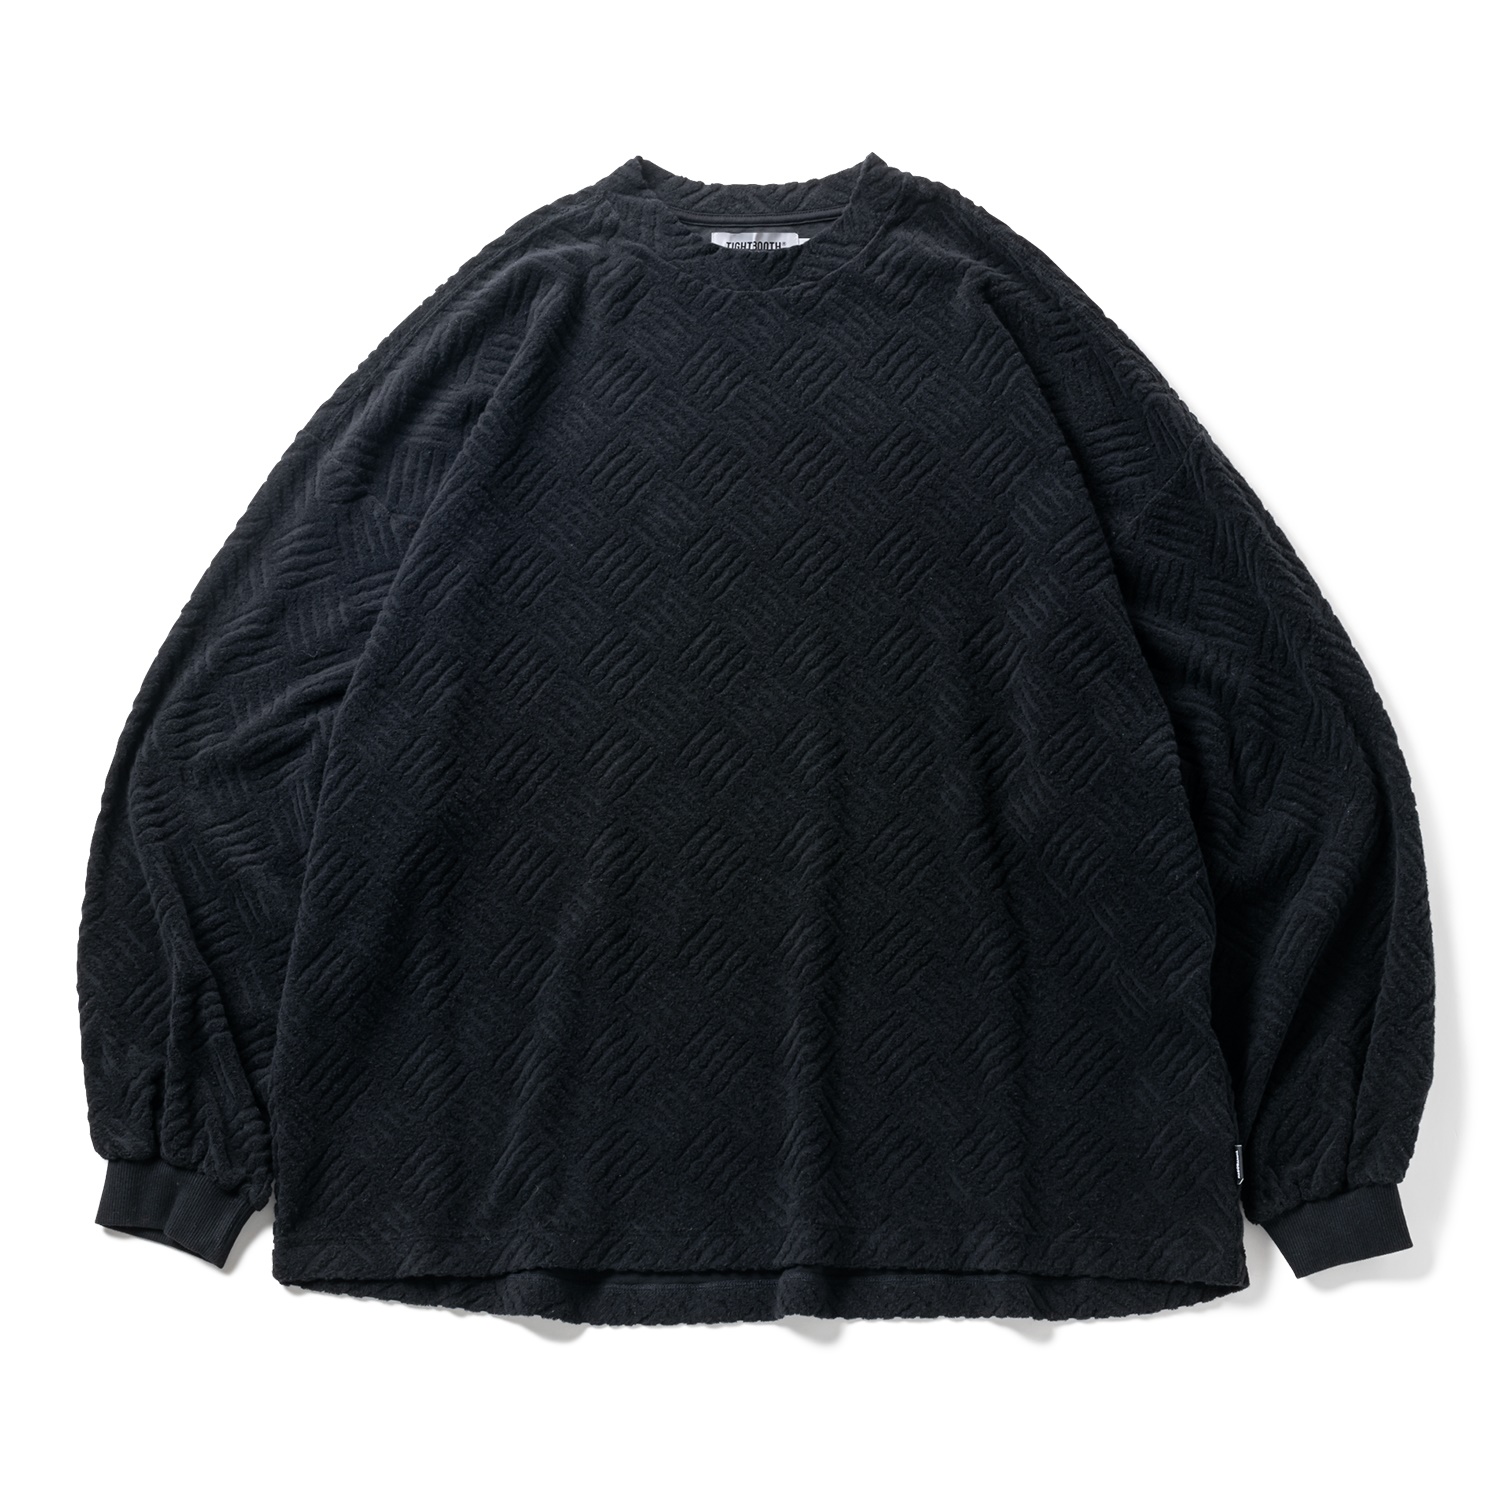 TIGHTBOOTH/CHECKER PLATE L/S TOP（Black） 【30%OFF】［パイル